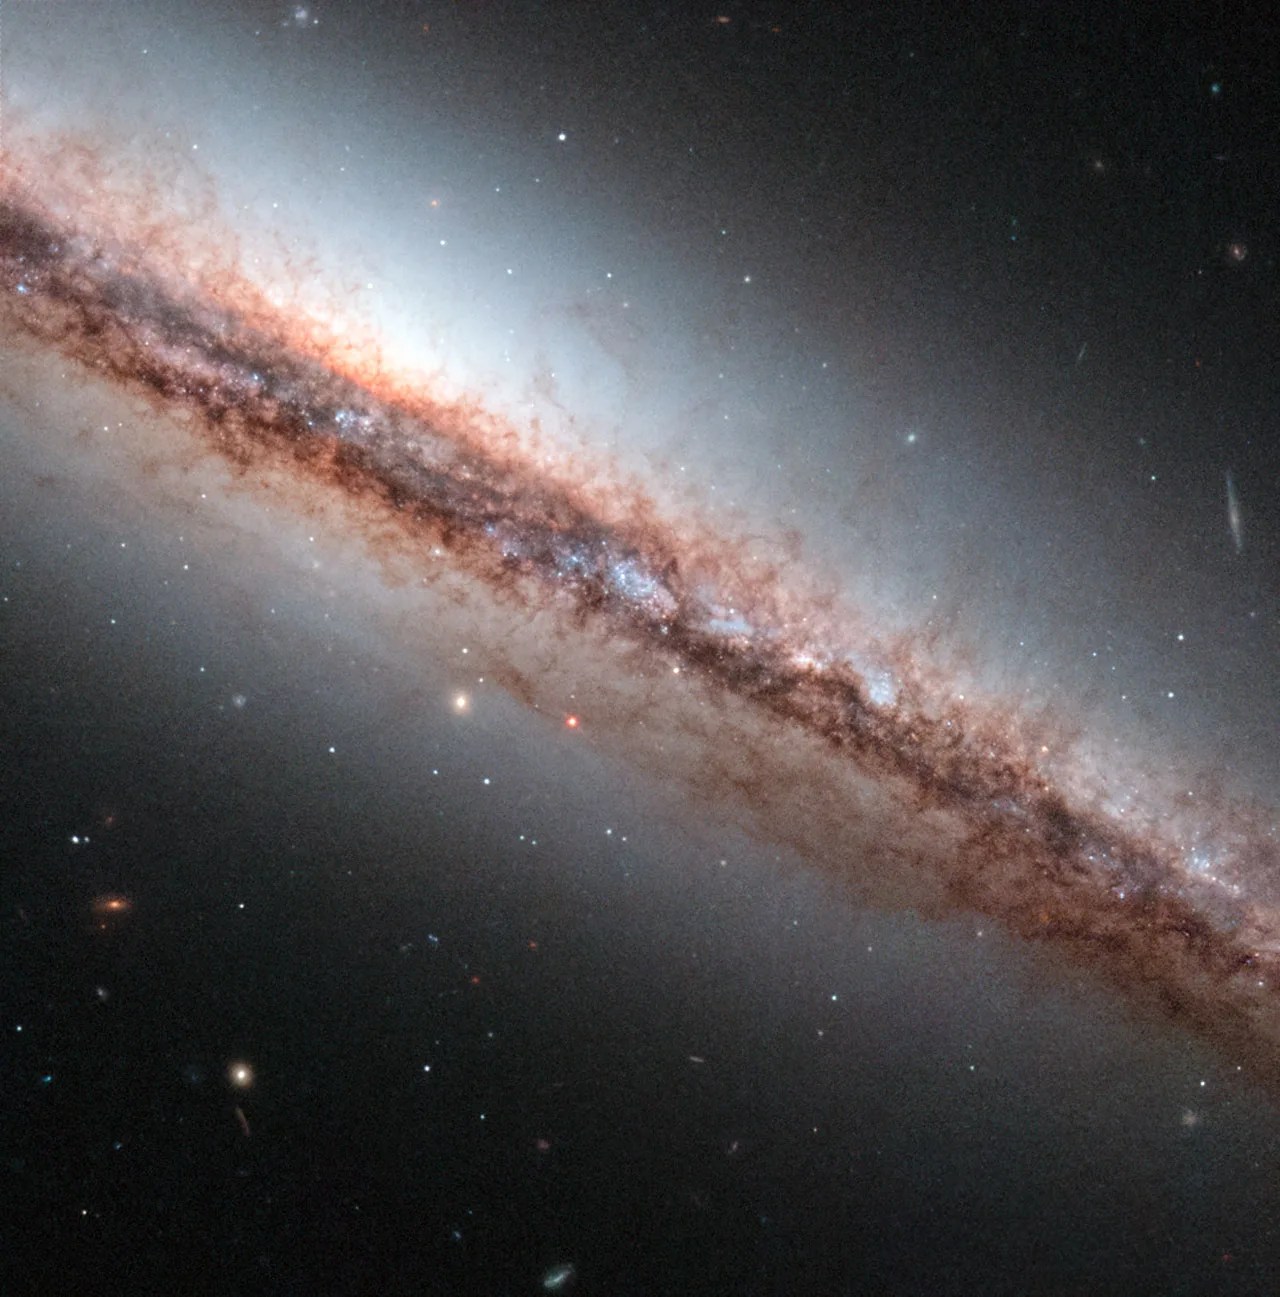 Edge on spiral galaxy with dark dust clouds and a surrounding hazy glow slashes across the frame from the upper left corner to the lower right corner.